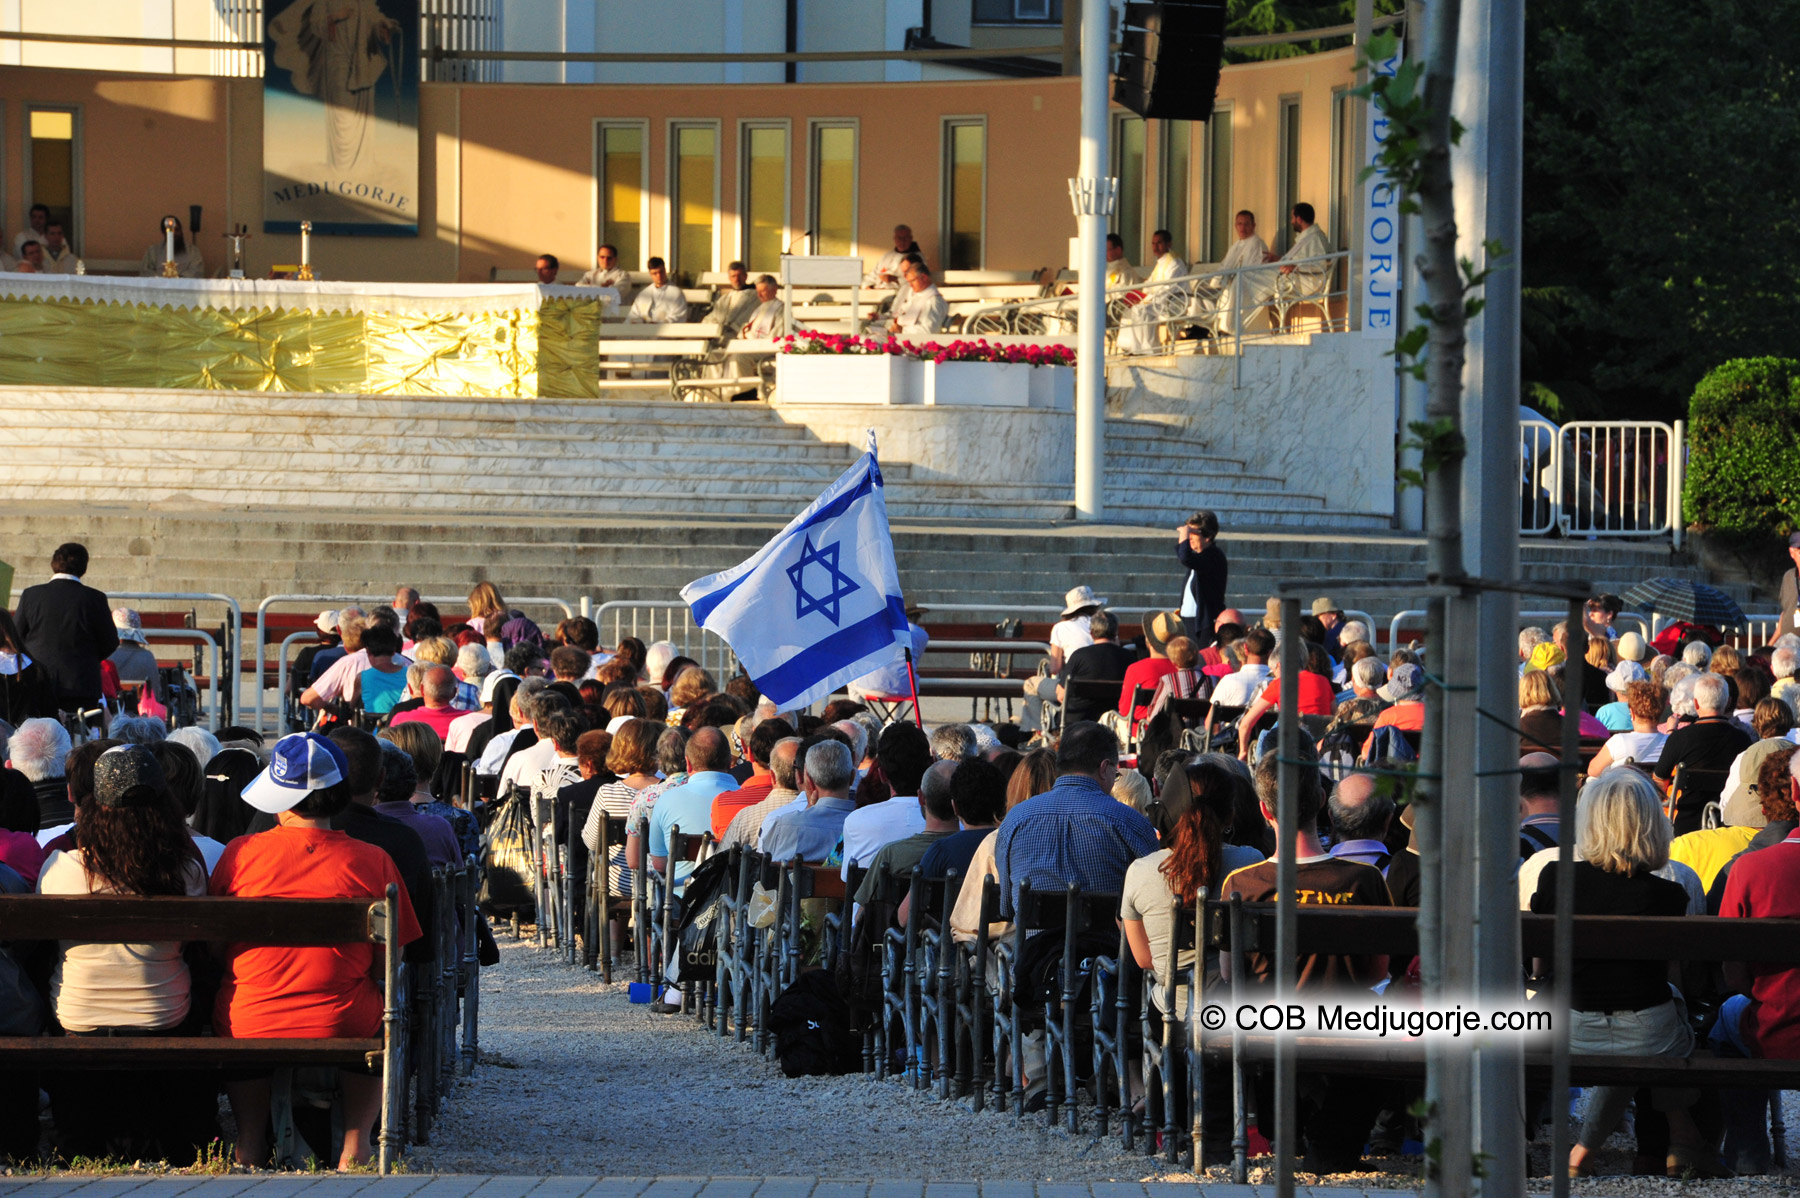 An Israeli flag at Apparition Time Rosary, Medjugorje